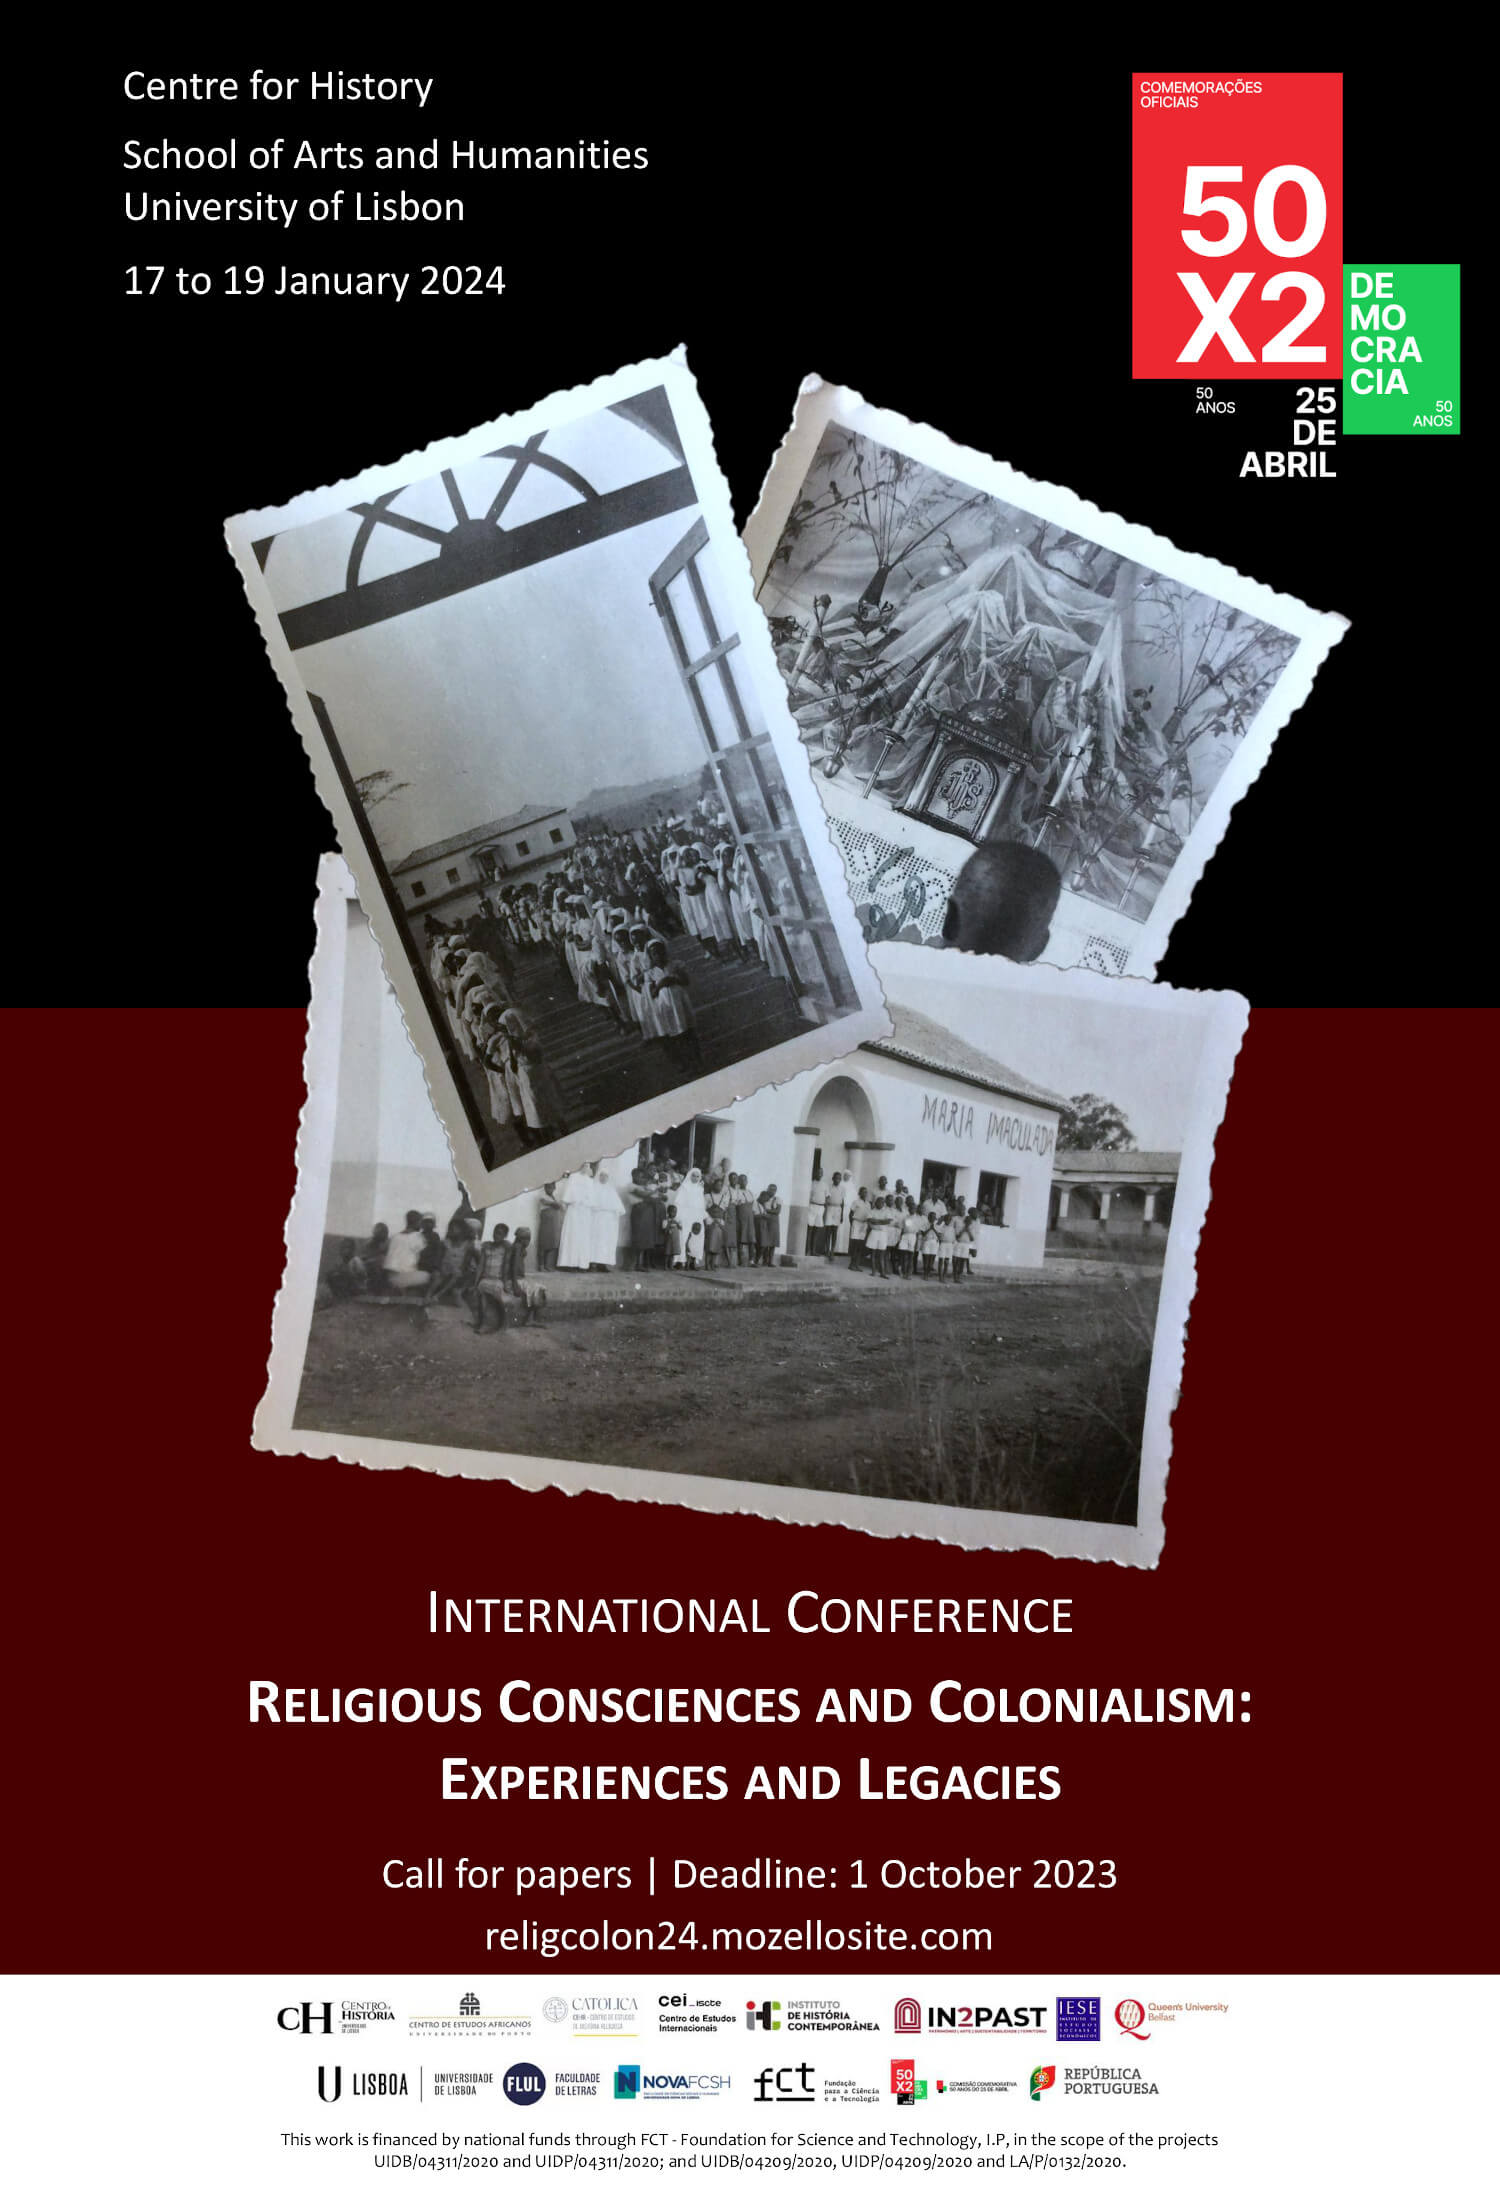 Poster for the call for papers of the international congress “Religious Consciences and Colonialism: Experiences and Legacies”, organised under the framework of the commemorations of the 50th anniversary of Carnation Revolution. It will take place at the Faculty of Humanities of the University of Lisbon between 17 and 19 January 2024. The deadline for proposal submission is 1 October 2023. The poster includes several uncredited pictures of religious missions and processions in Portuguese colonies.